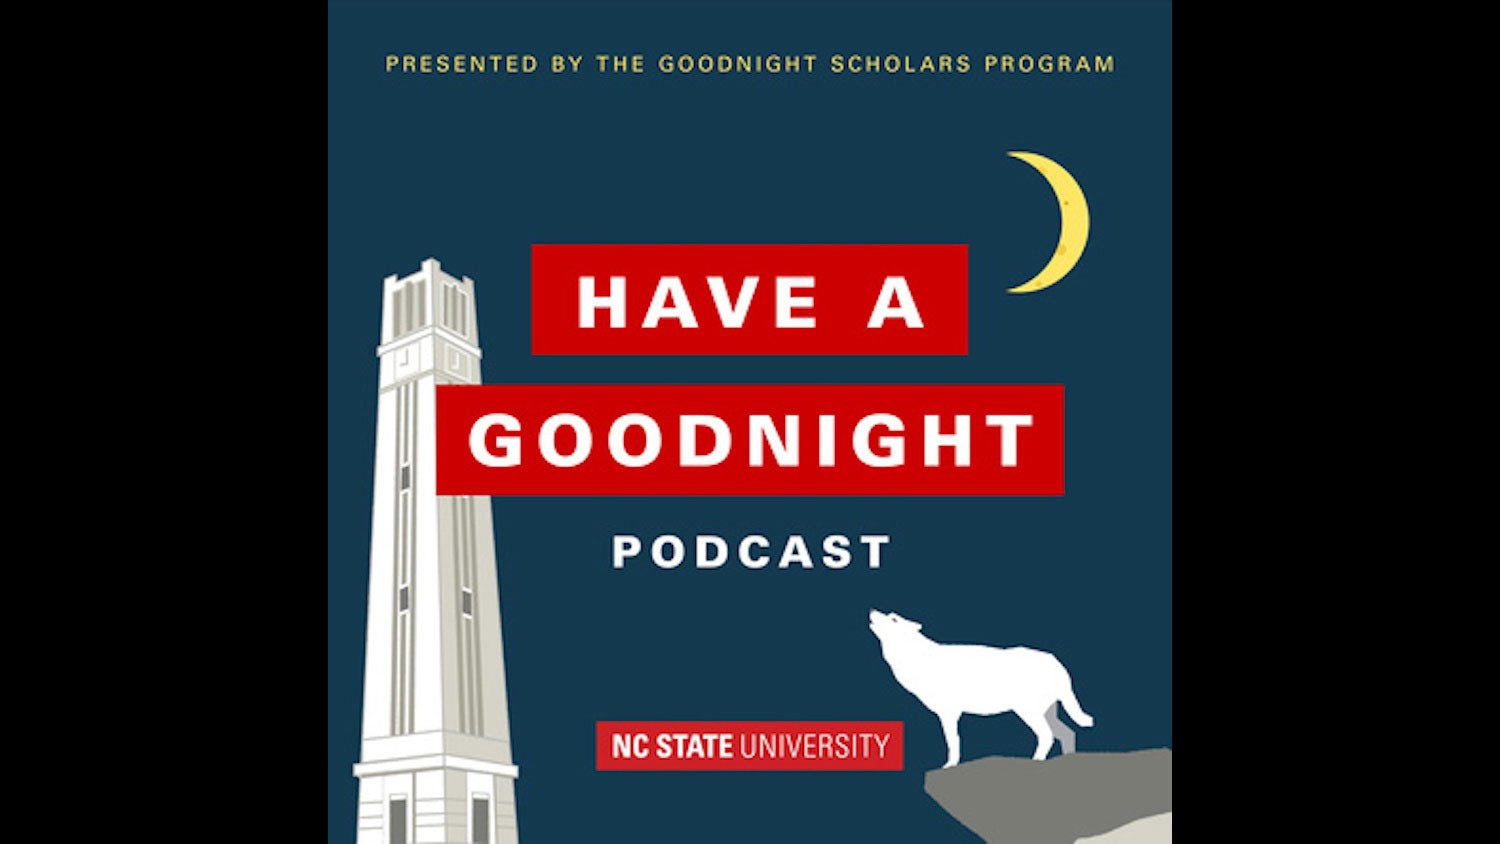 Have a Goodnight Podcast artwork